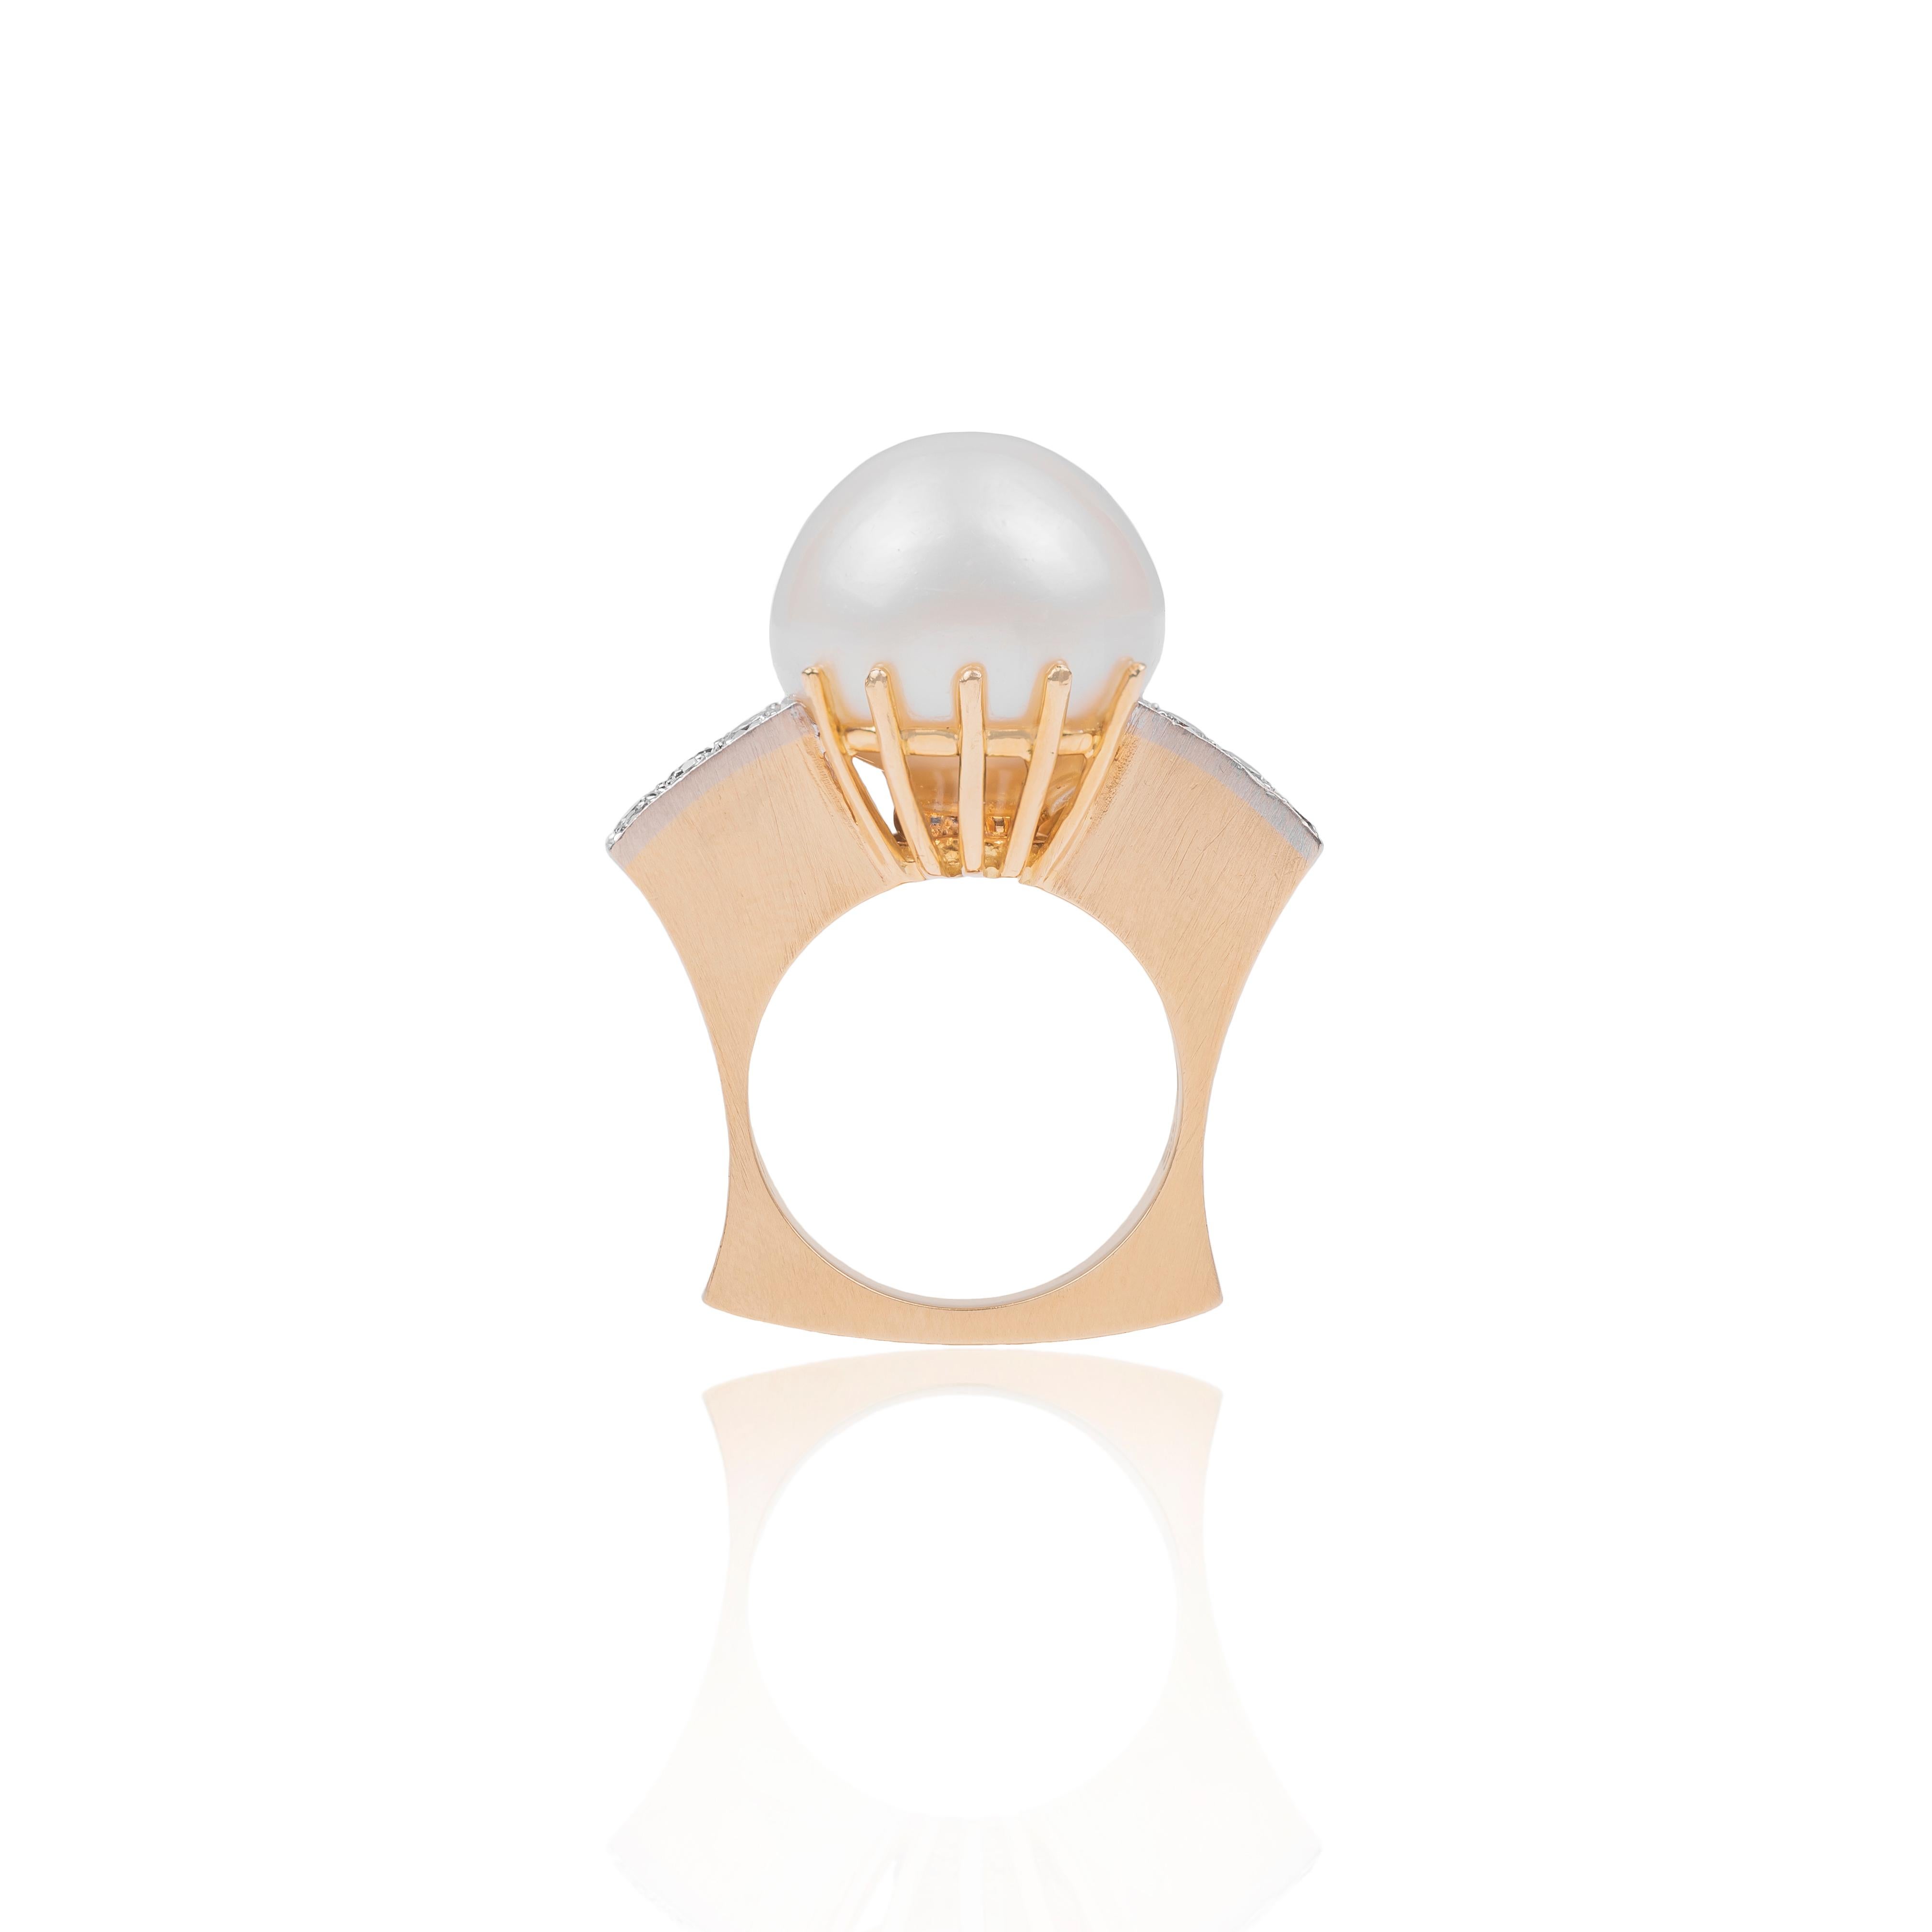 Brilliant Cut Chantecler Ring 18k Yellow Gold with Pearl and Diamonds